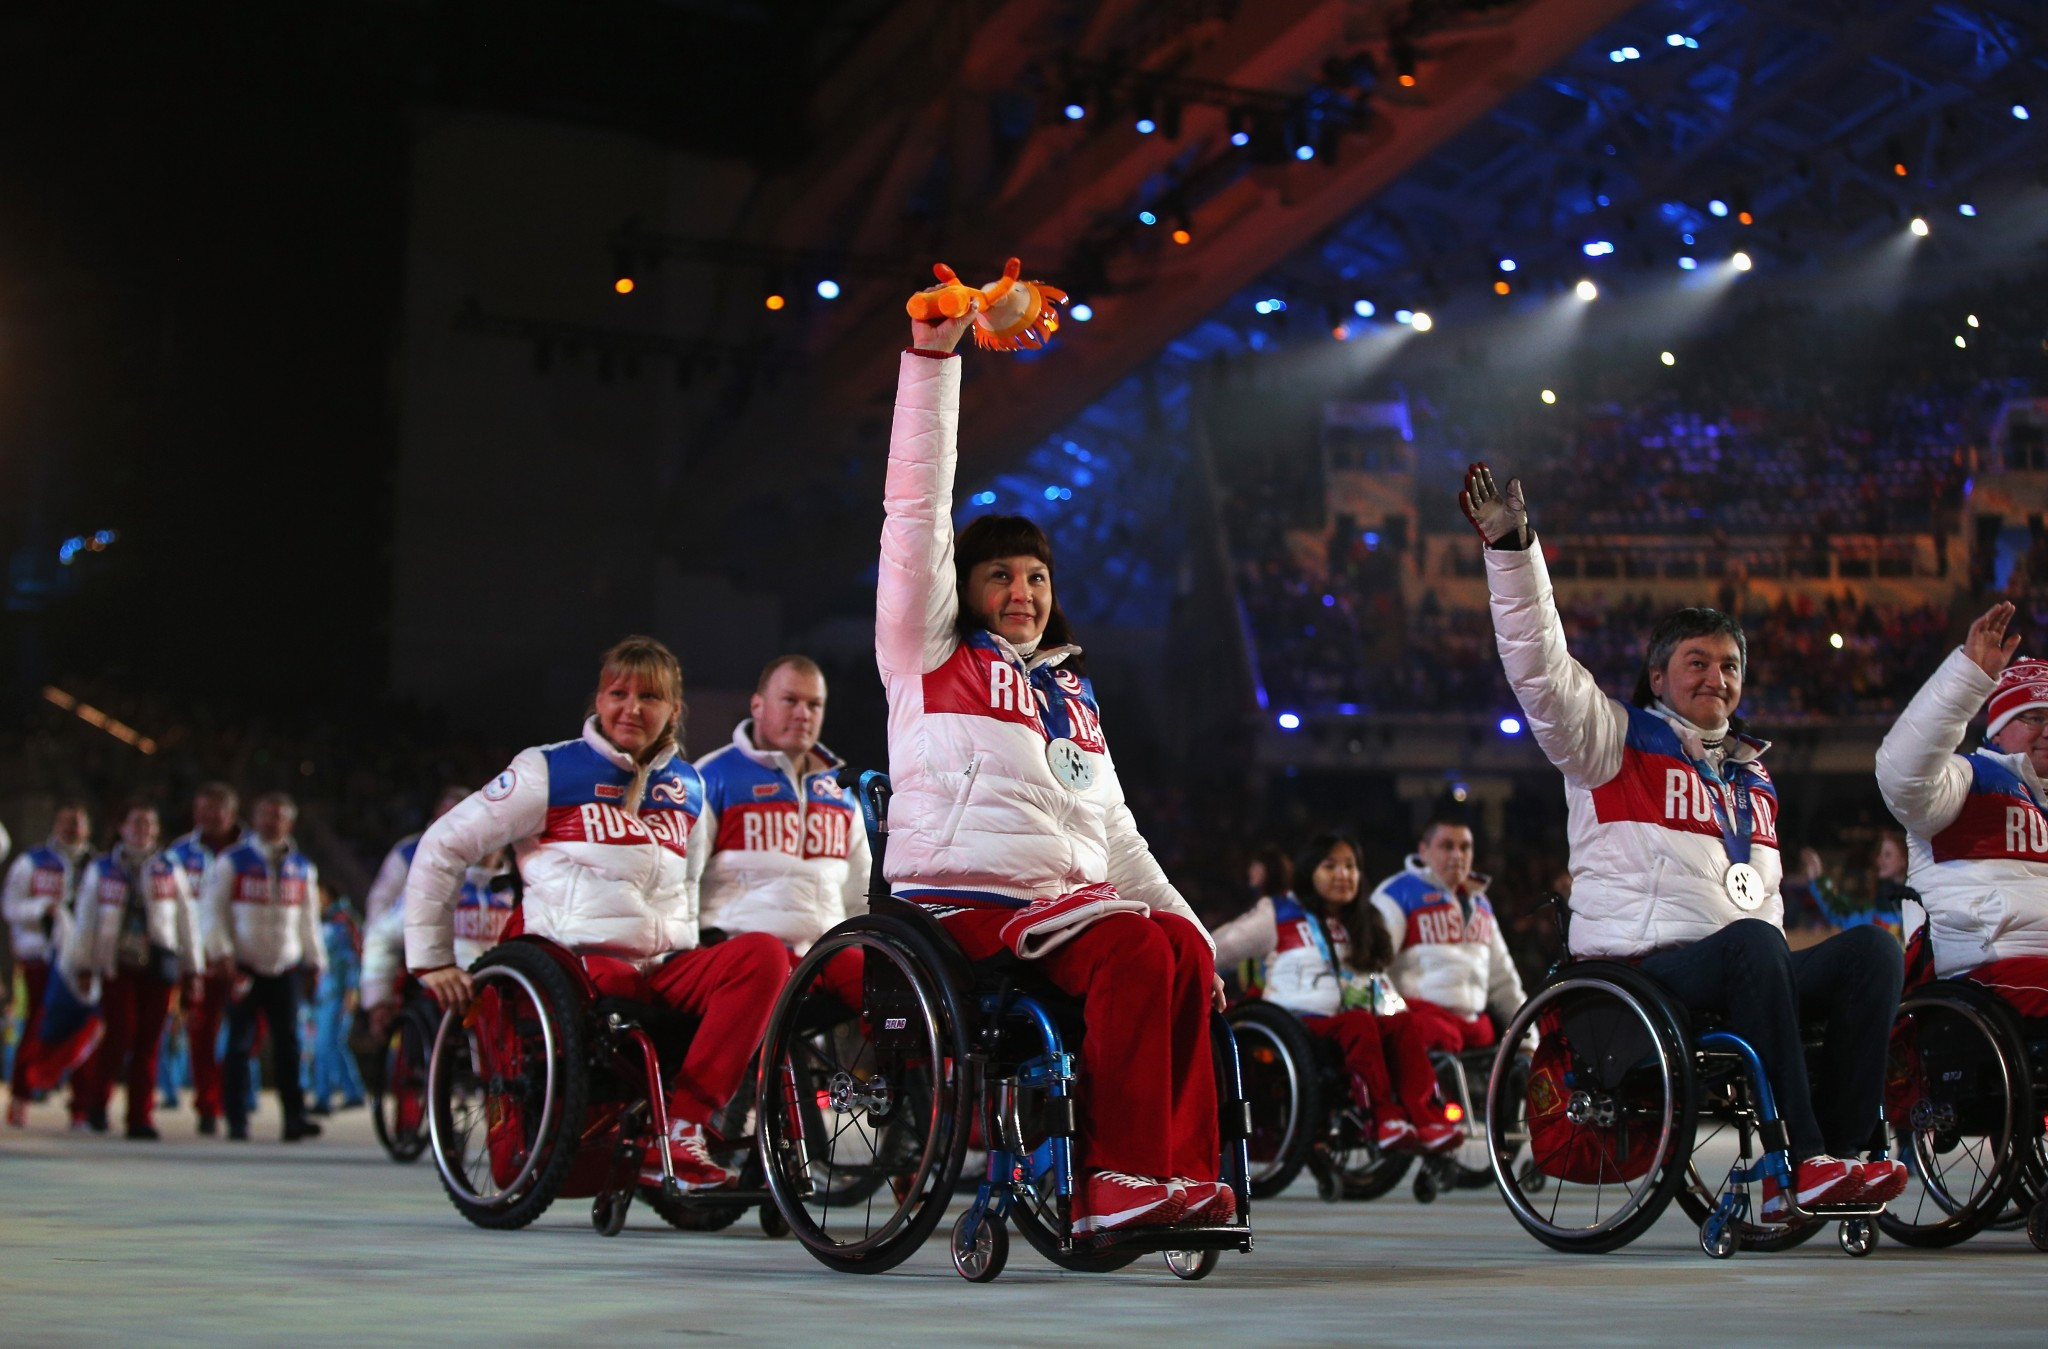 Russia won over a third of Paralympic medals at Sochi 2014, but the country could miss Pyeongchang 2018 ©Getty Images